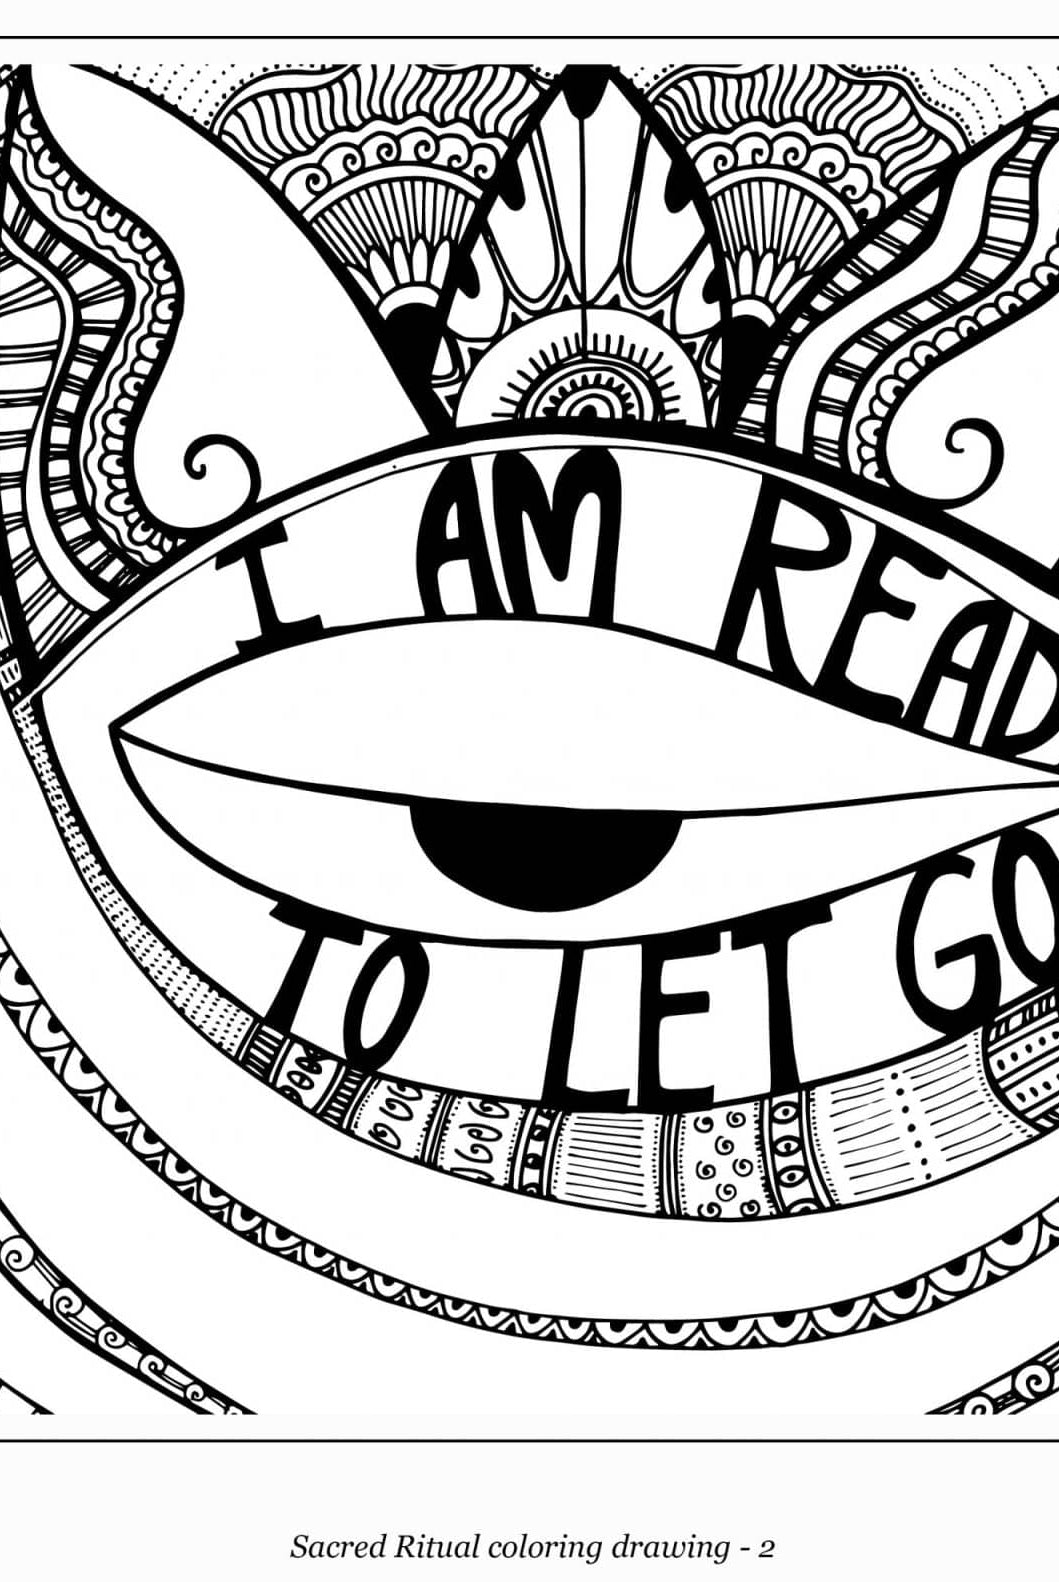 I'm ready to let go of - coloring page